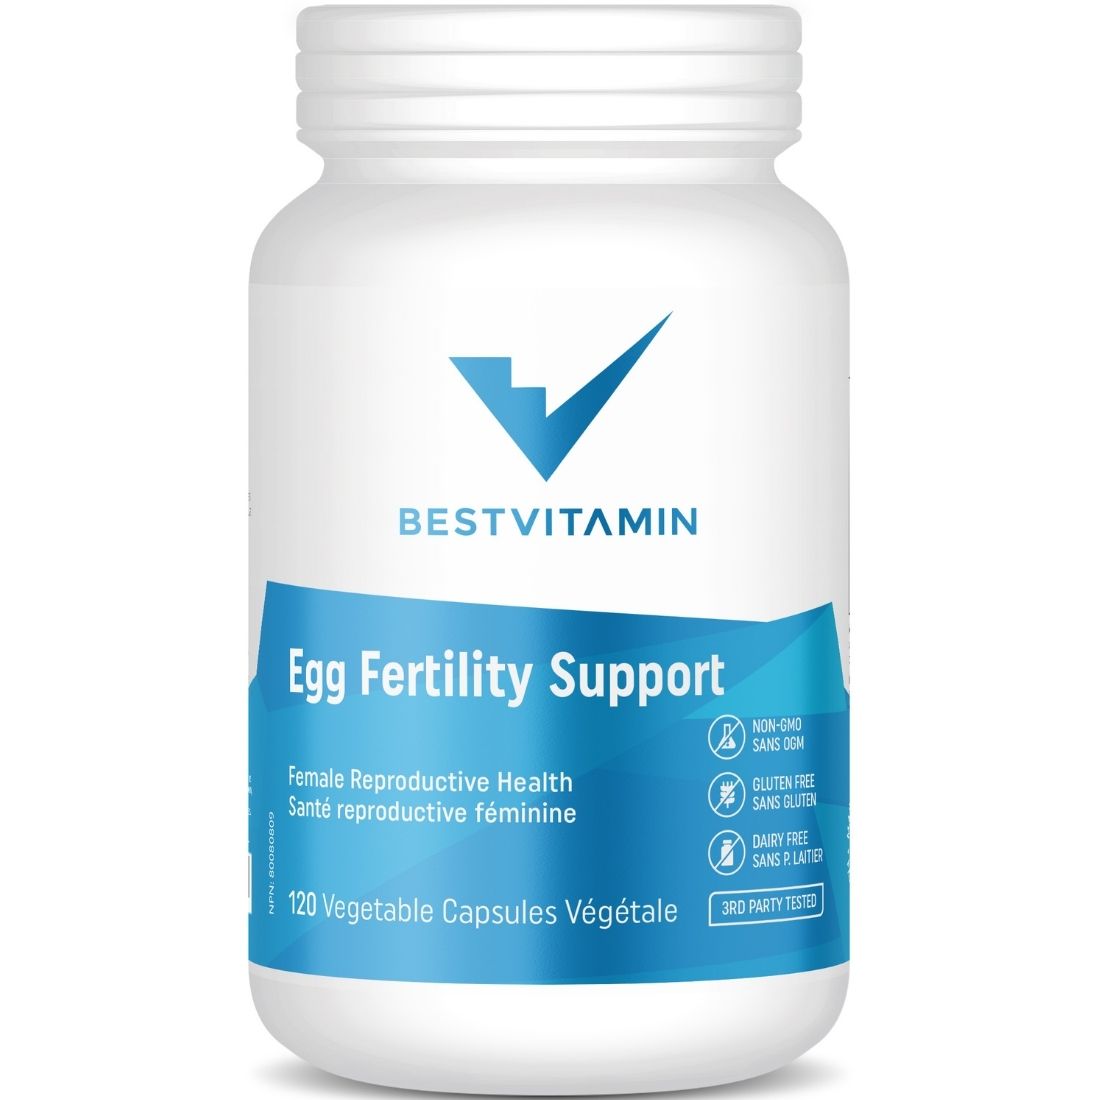 BestVitamin Best Egg Fertility Support, Helps improve egg quality & live birth rates, 120 Vegetable Capsules